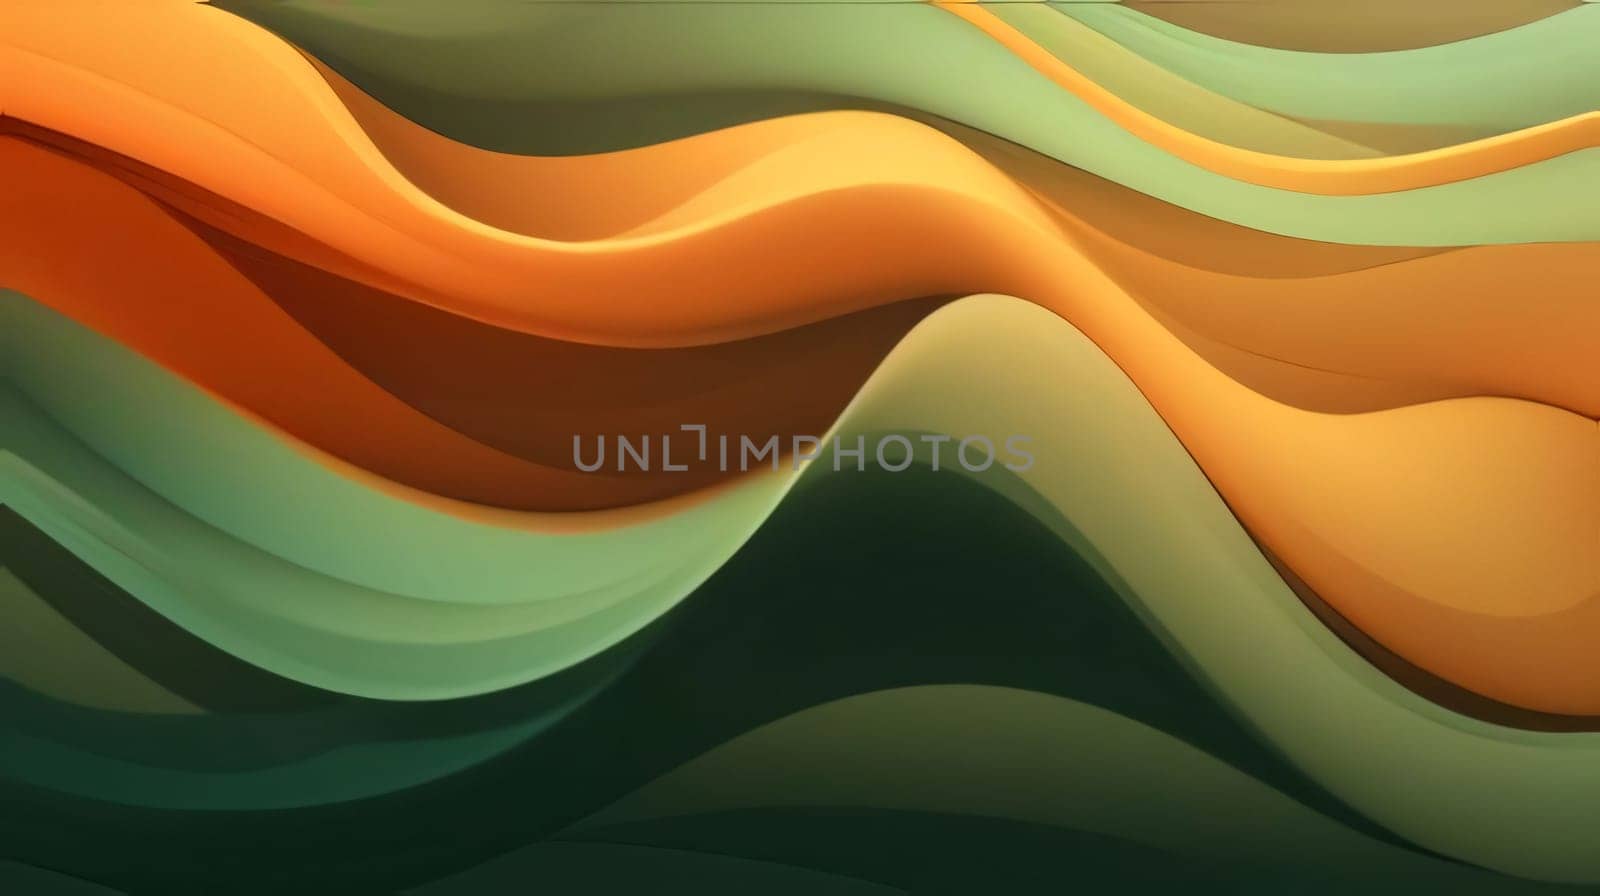 Abstract background design: 3d rendering of abstract wavy background. Computer generated image.